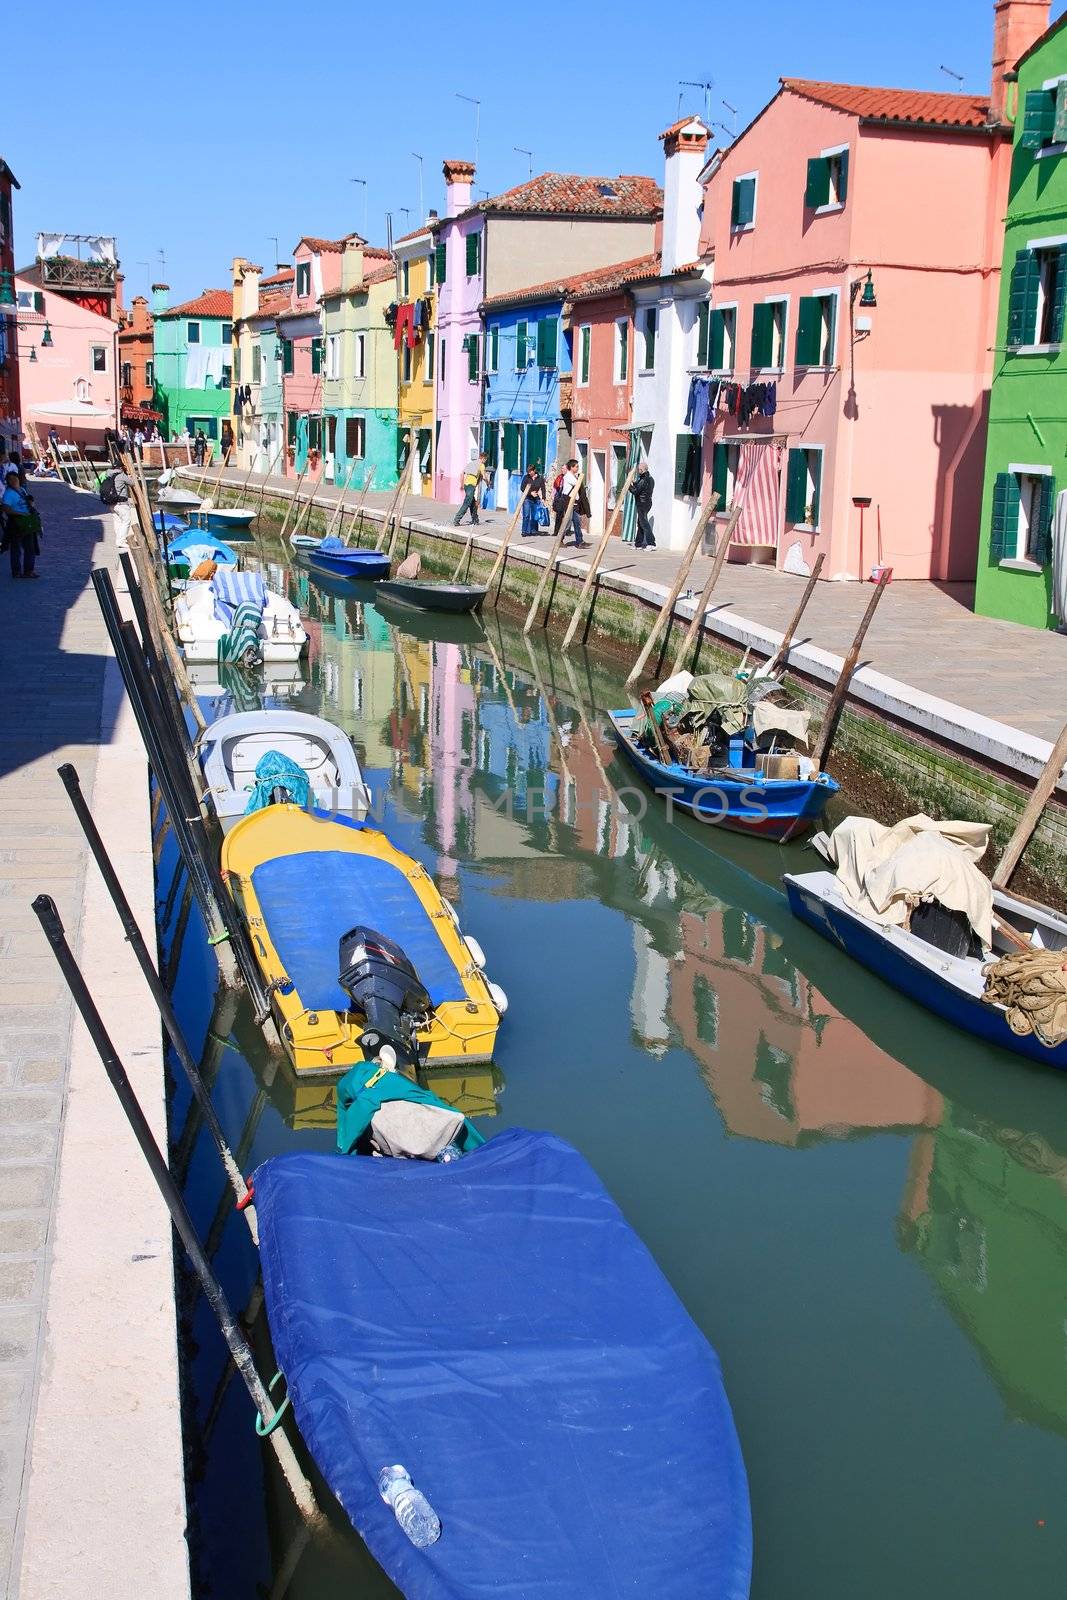 Colorful buildings in main canal Burano island, Venice Italy